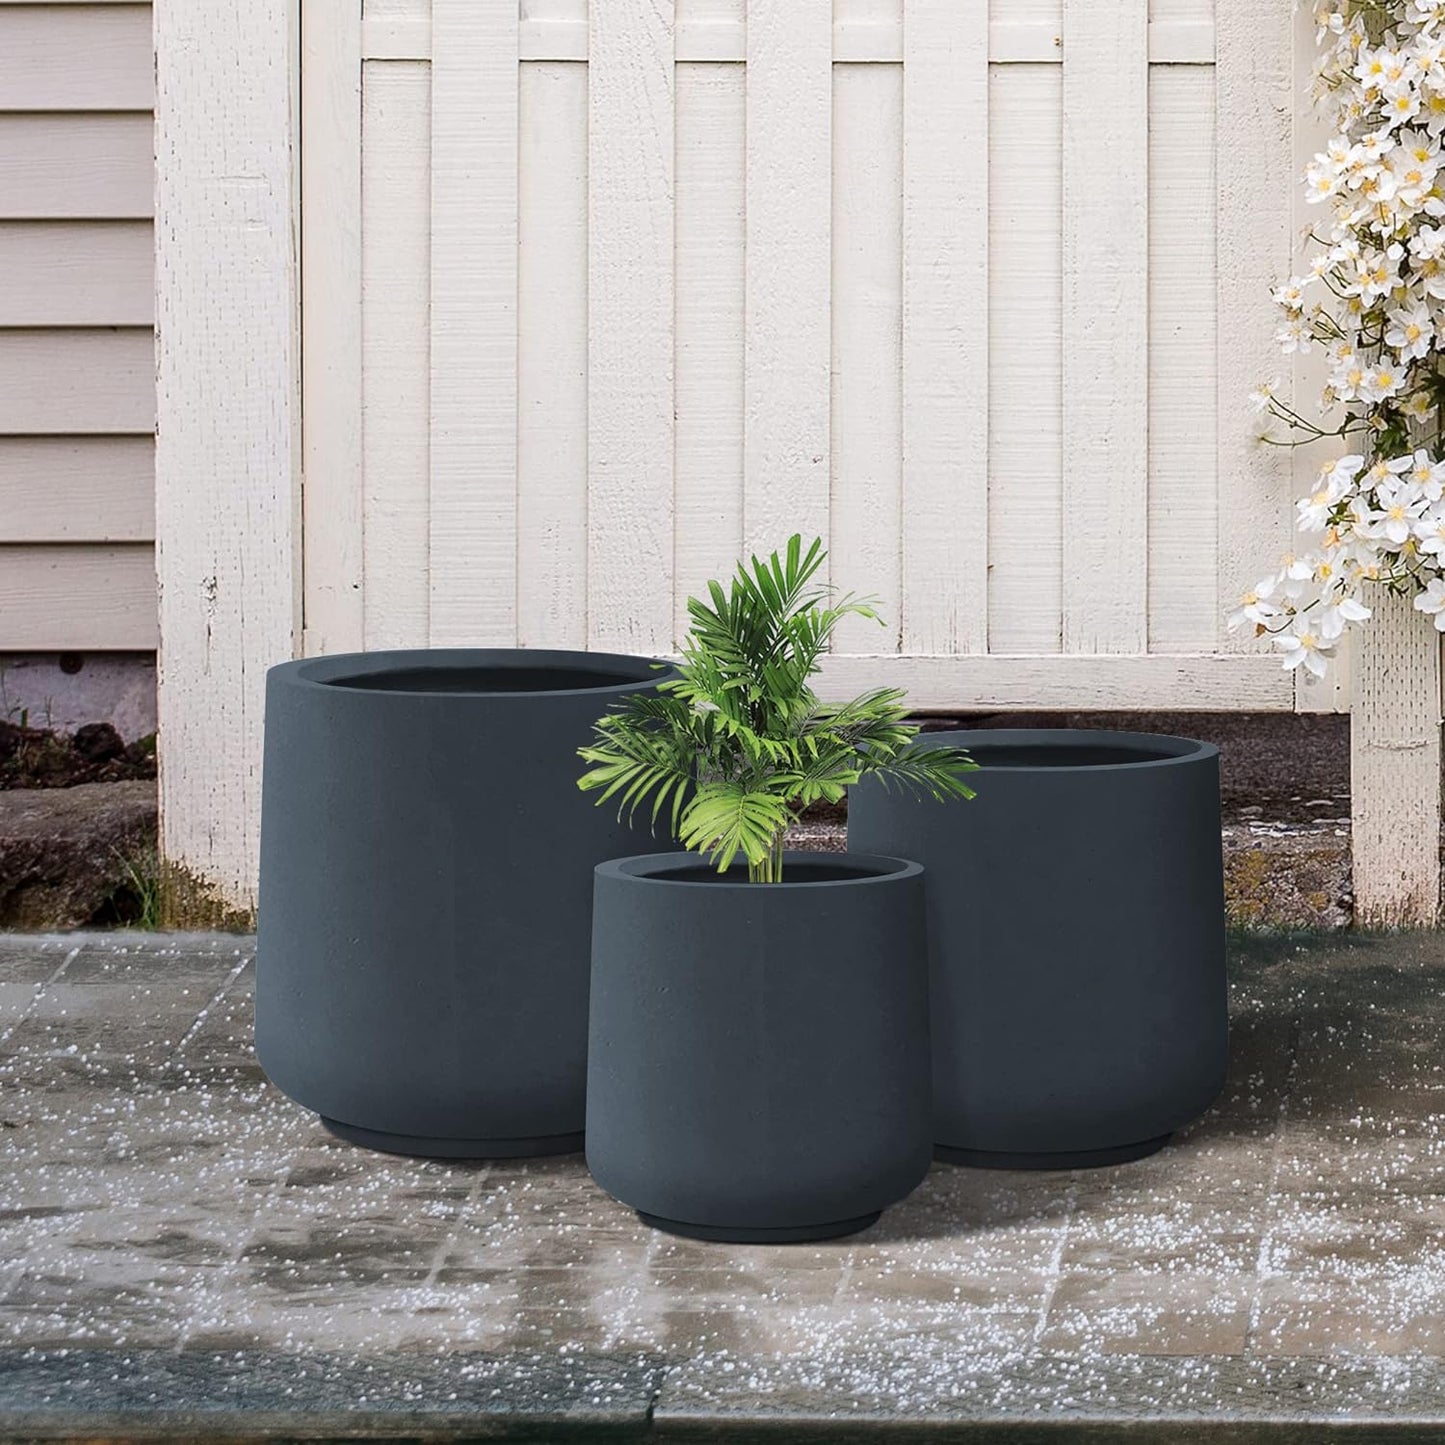 Kante 15.3"+11.6"+8.2" Dia Round Concrete Planter, Large Outdoor Indoor Planter Pots Containers with Drainage Holes and Rubber Plug for Home Garden Patio, Weathered Concrete